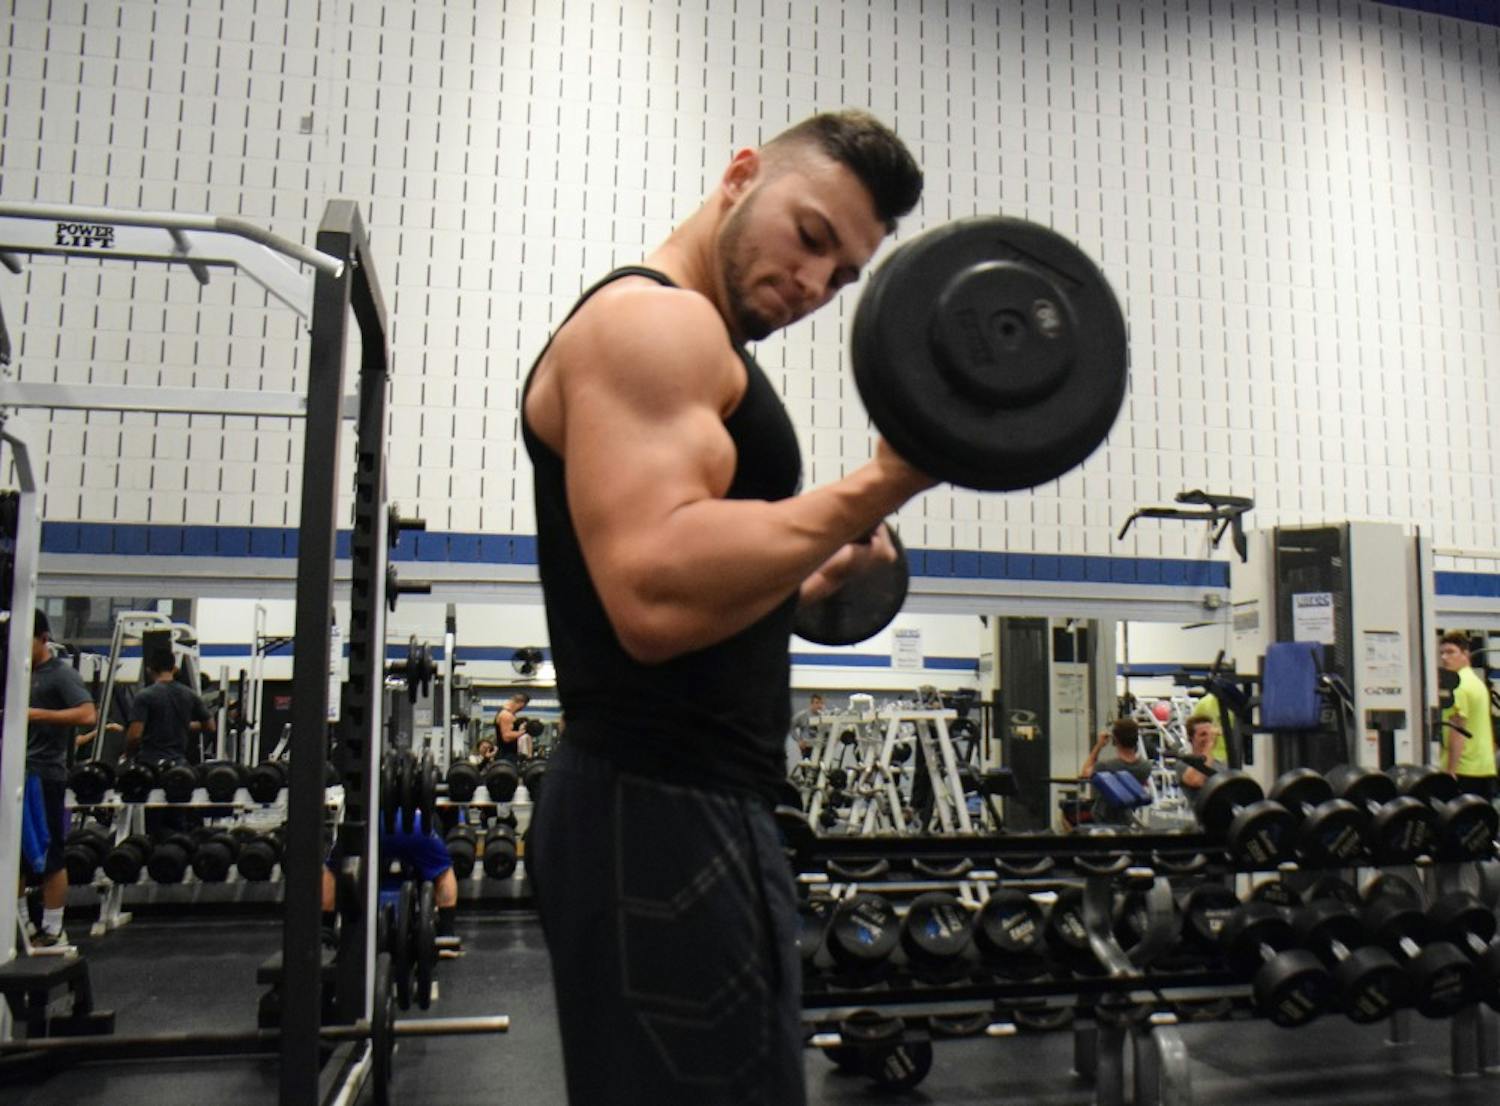 Joey Santa Lucia, a sophomore business major, trains five days a week to maintain a healthy lifestyle.&nbsp;